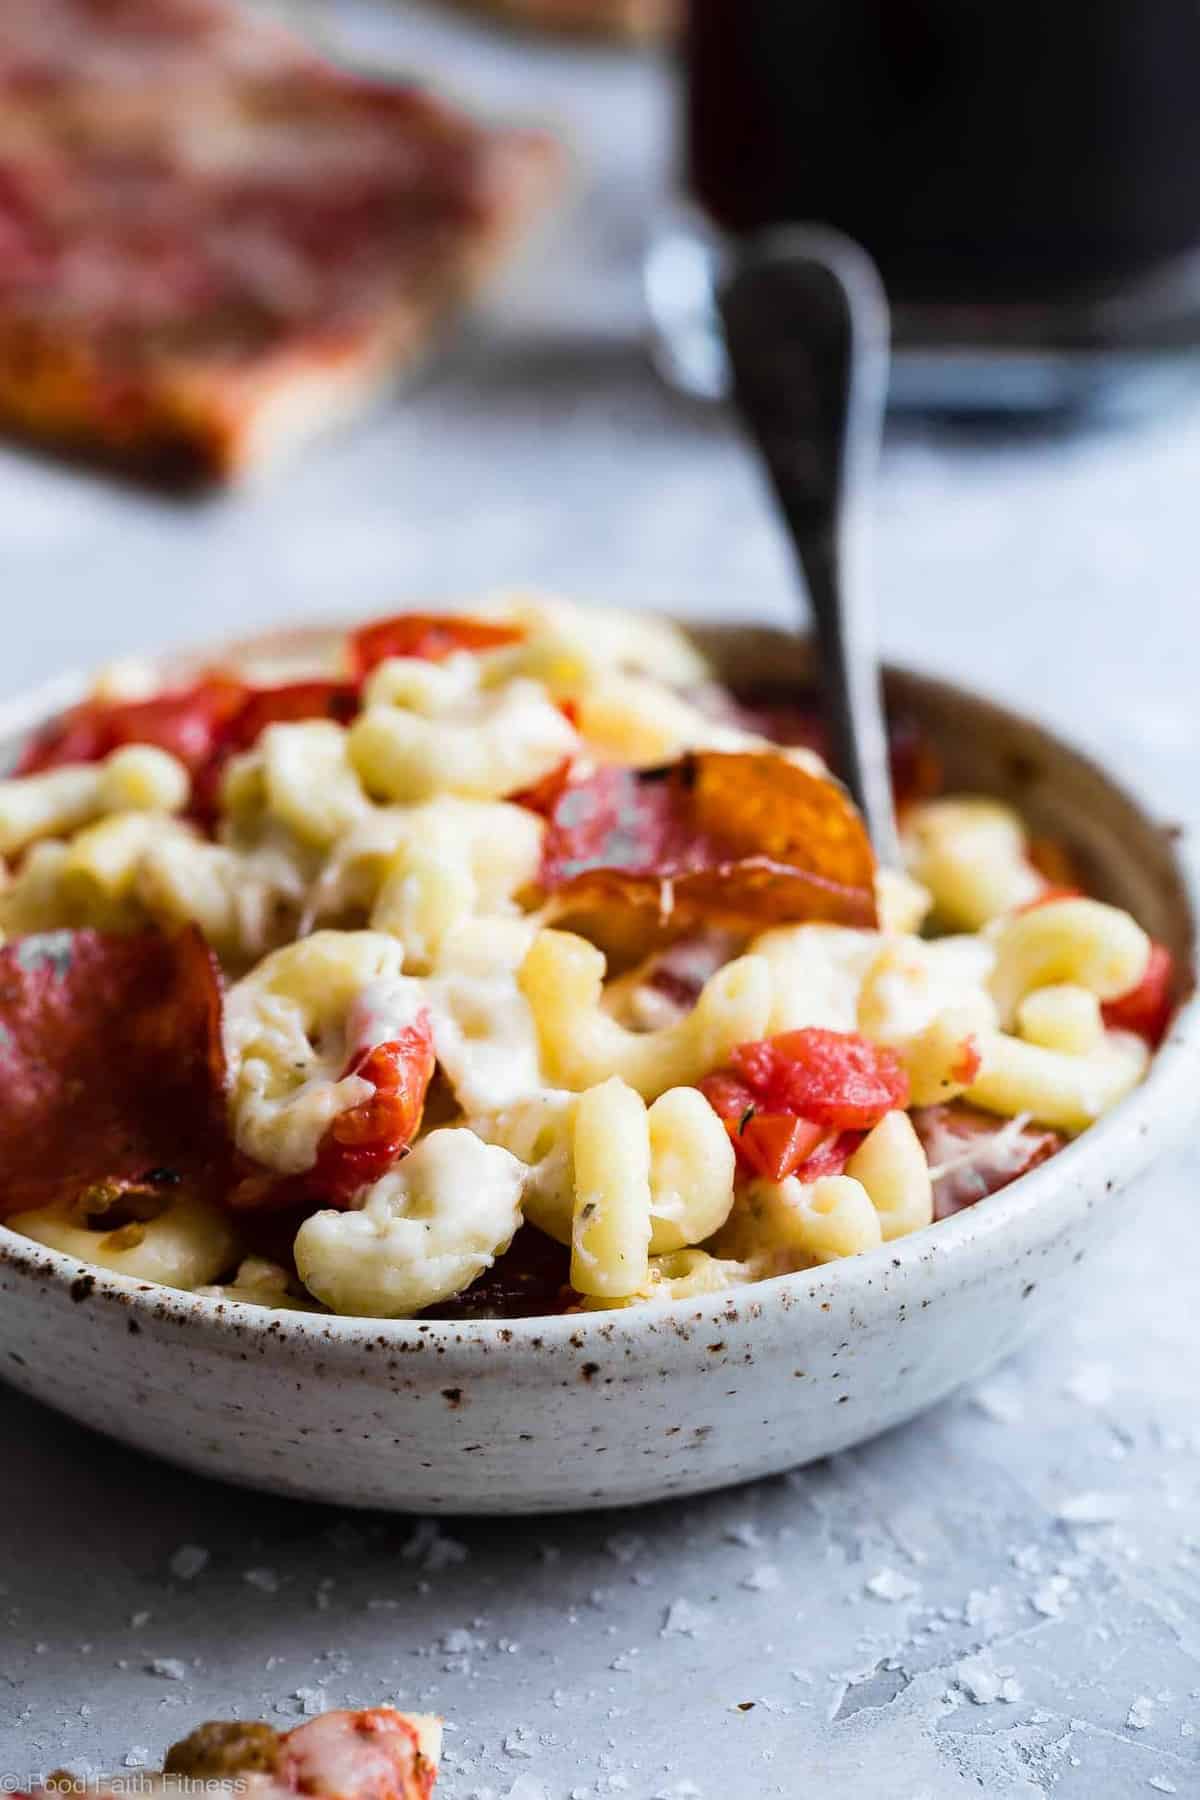 Gluten Free Greek Yogurt Pizza Mac and Cheese - this homemade mac and cheese recipe tastes like pizza but is healthy, gluten free and protein packed thanks to Greek yogurt! A quick and easy dinner for both kids and adults! | #Foodfaithfitness | #Glutenfree #Greekyogurt #Healthy #Pizza #Kidfriendly